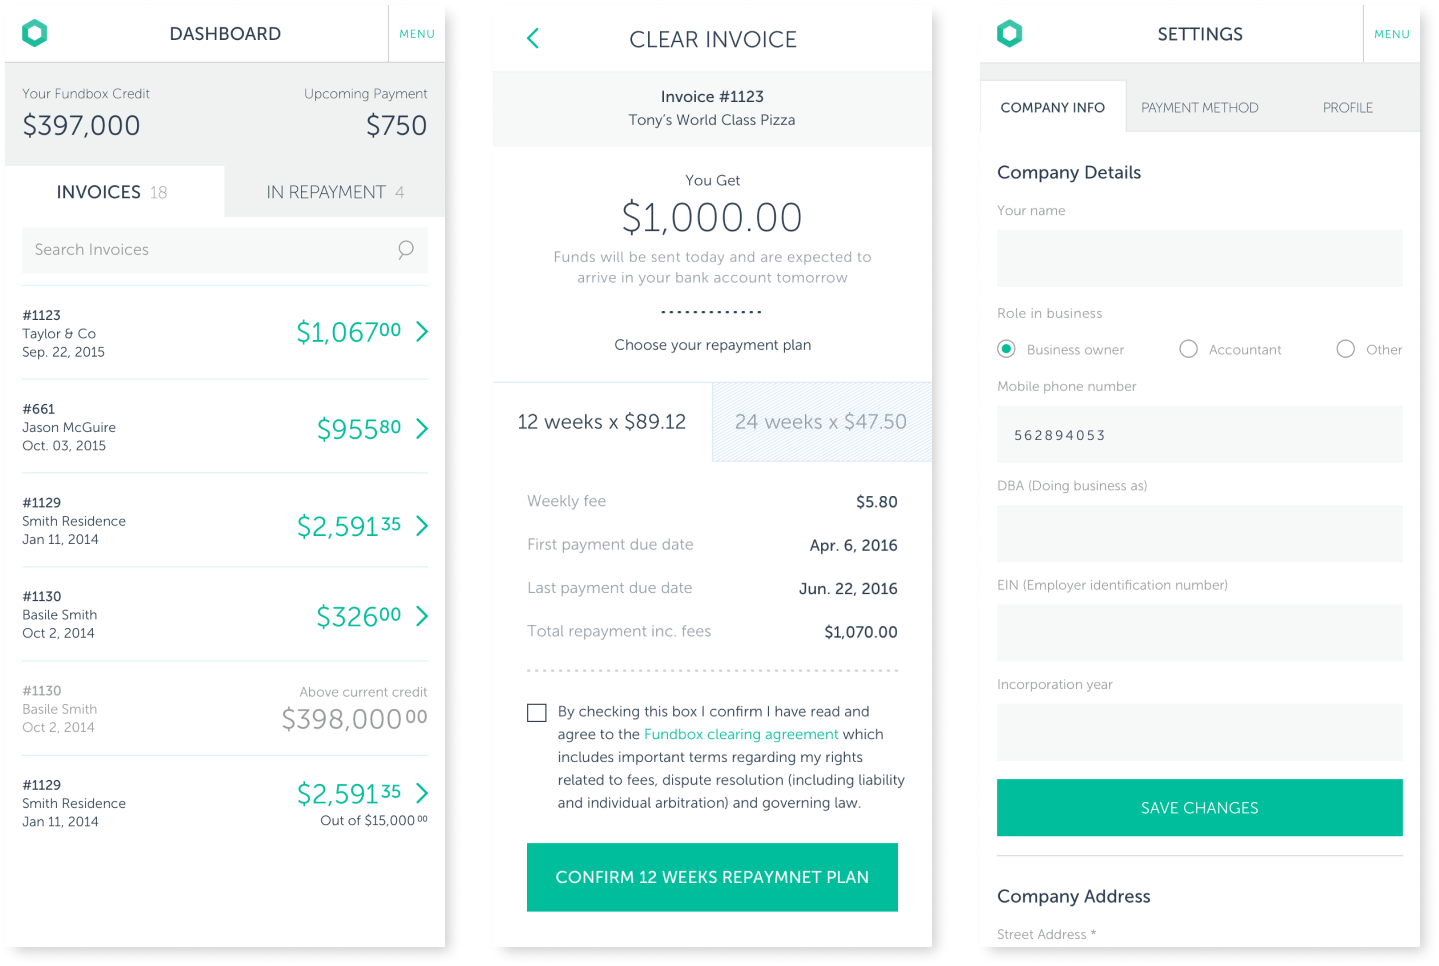 mobile designs for the 3 main screens: dashboard, clear invoice and settings.